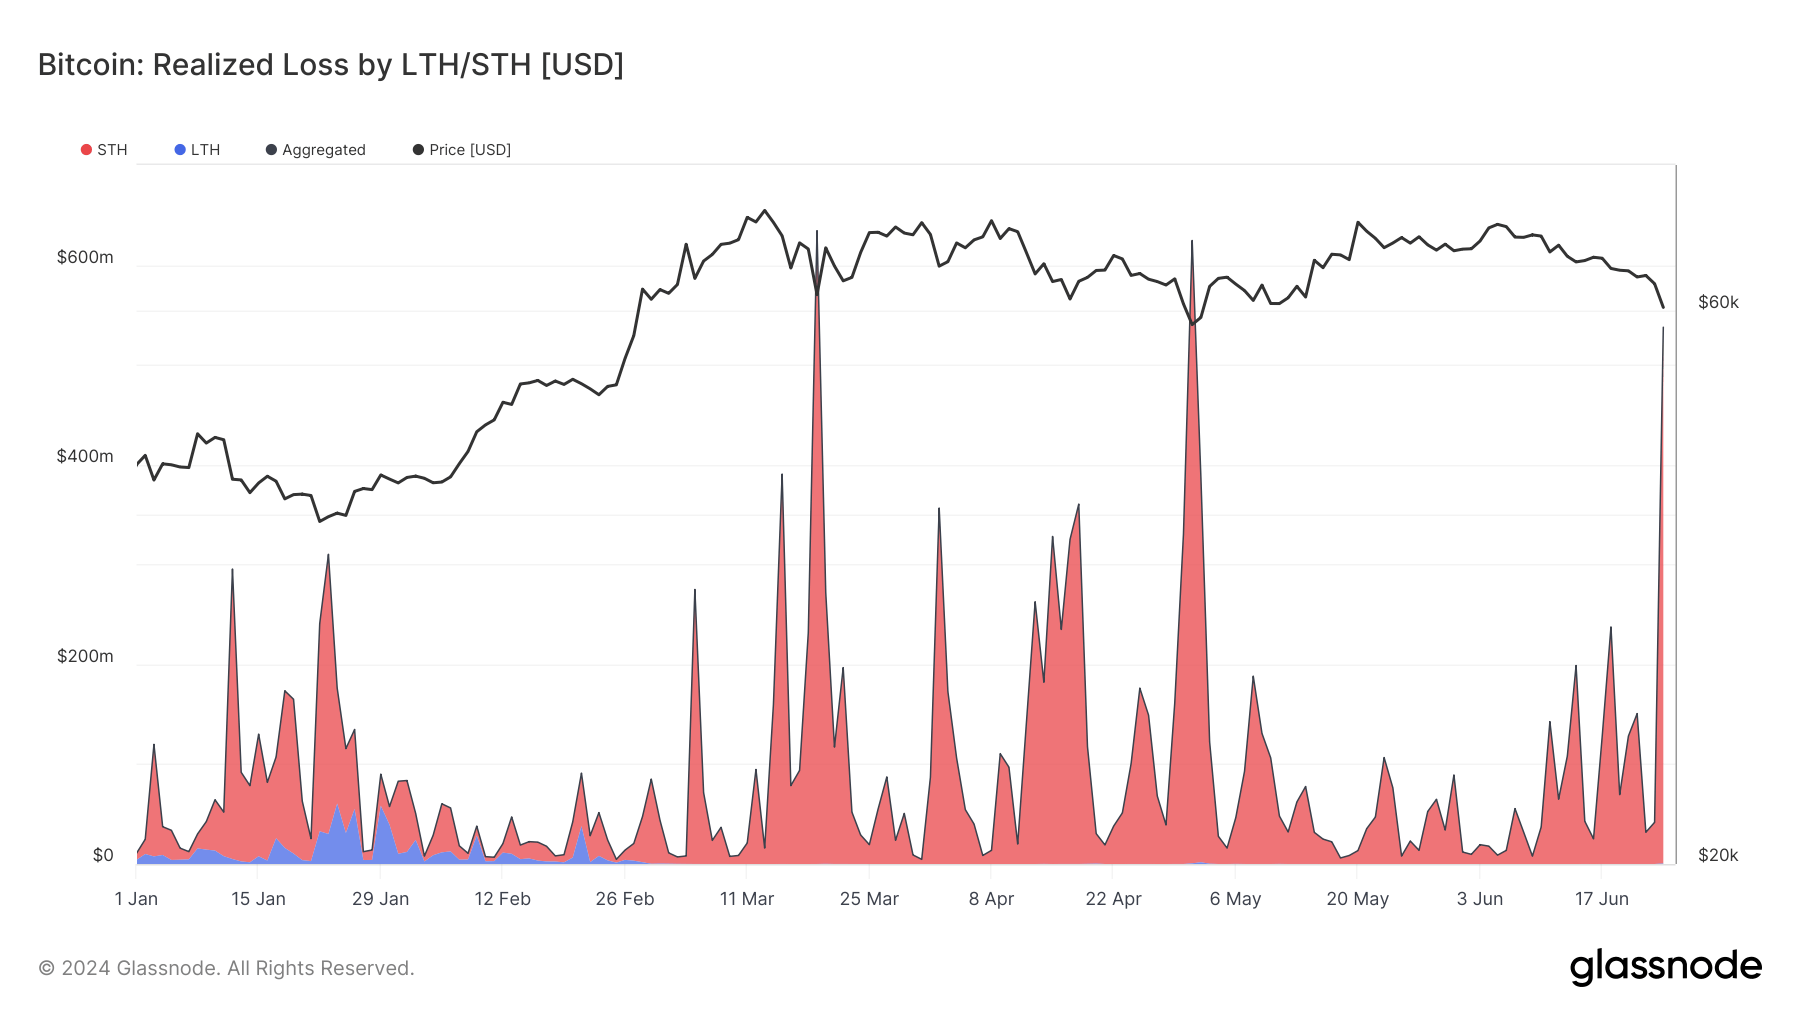 Bitcoin Realized Loss by LTH/STH: (Source: Glassnode)